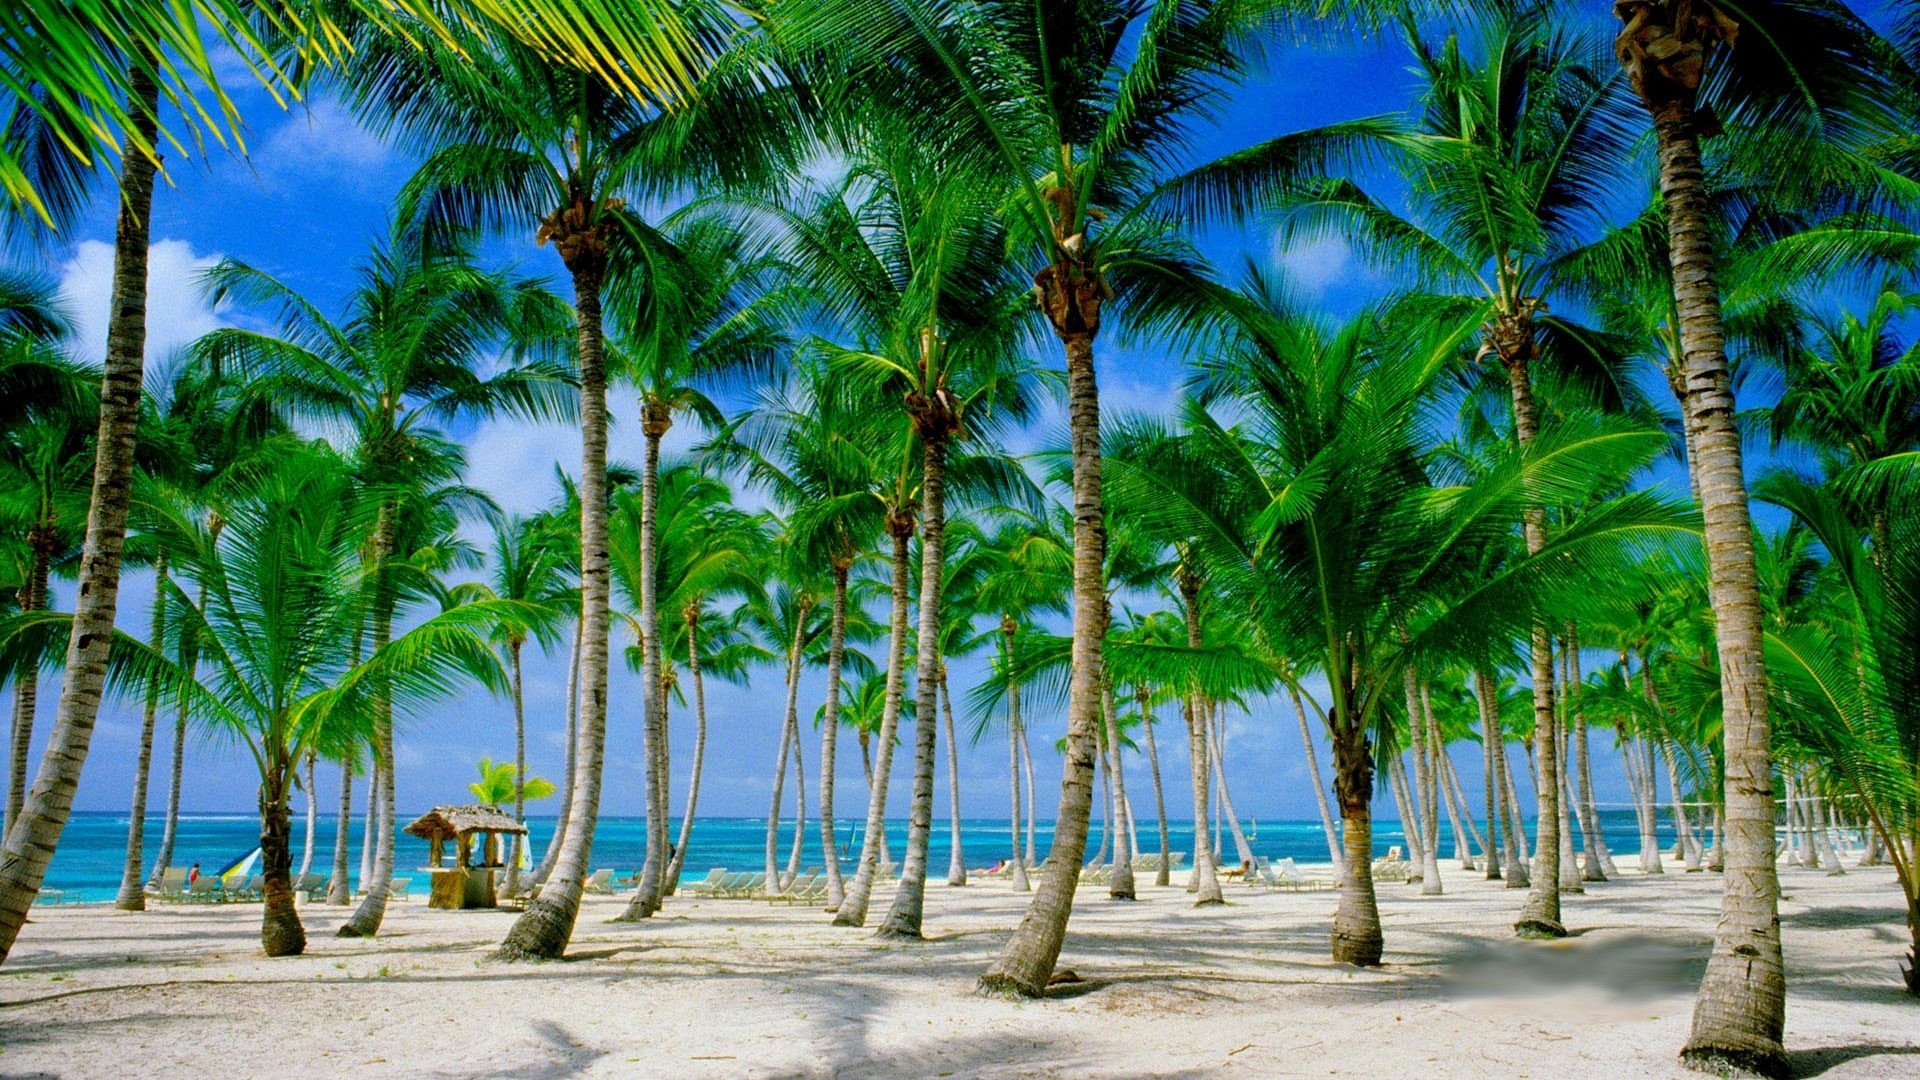 1920x1080 Beach Tropical Paradise Palms Summer Wallpaper With Scenes